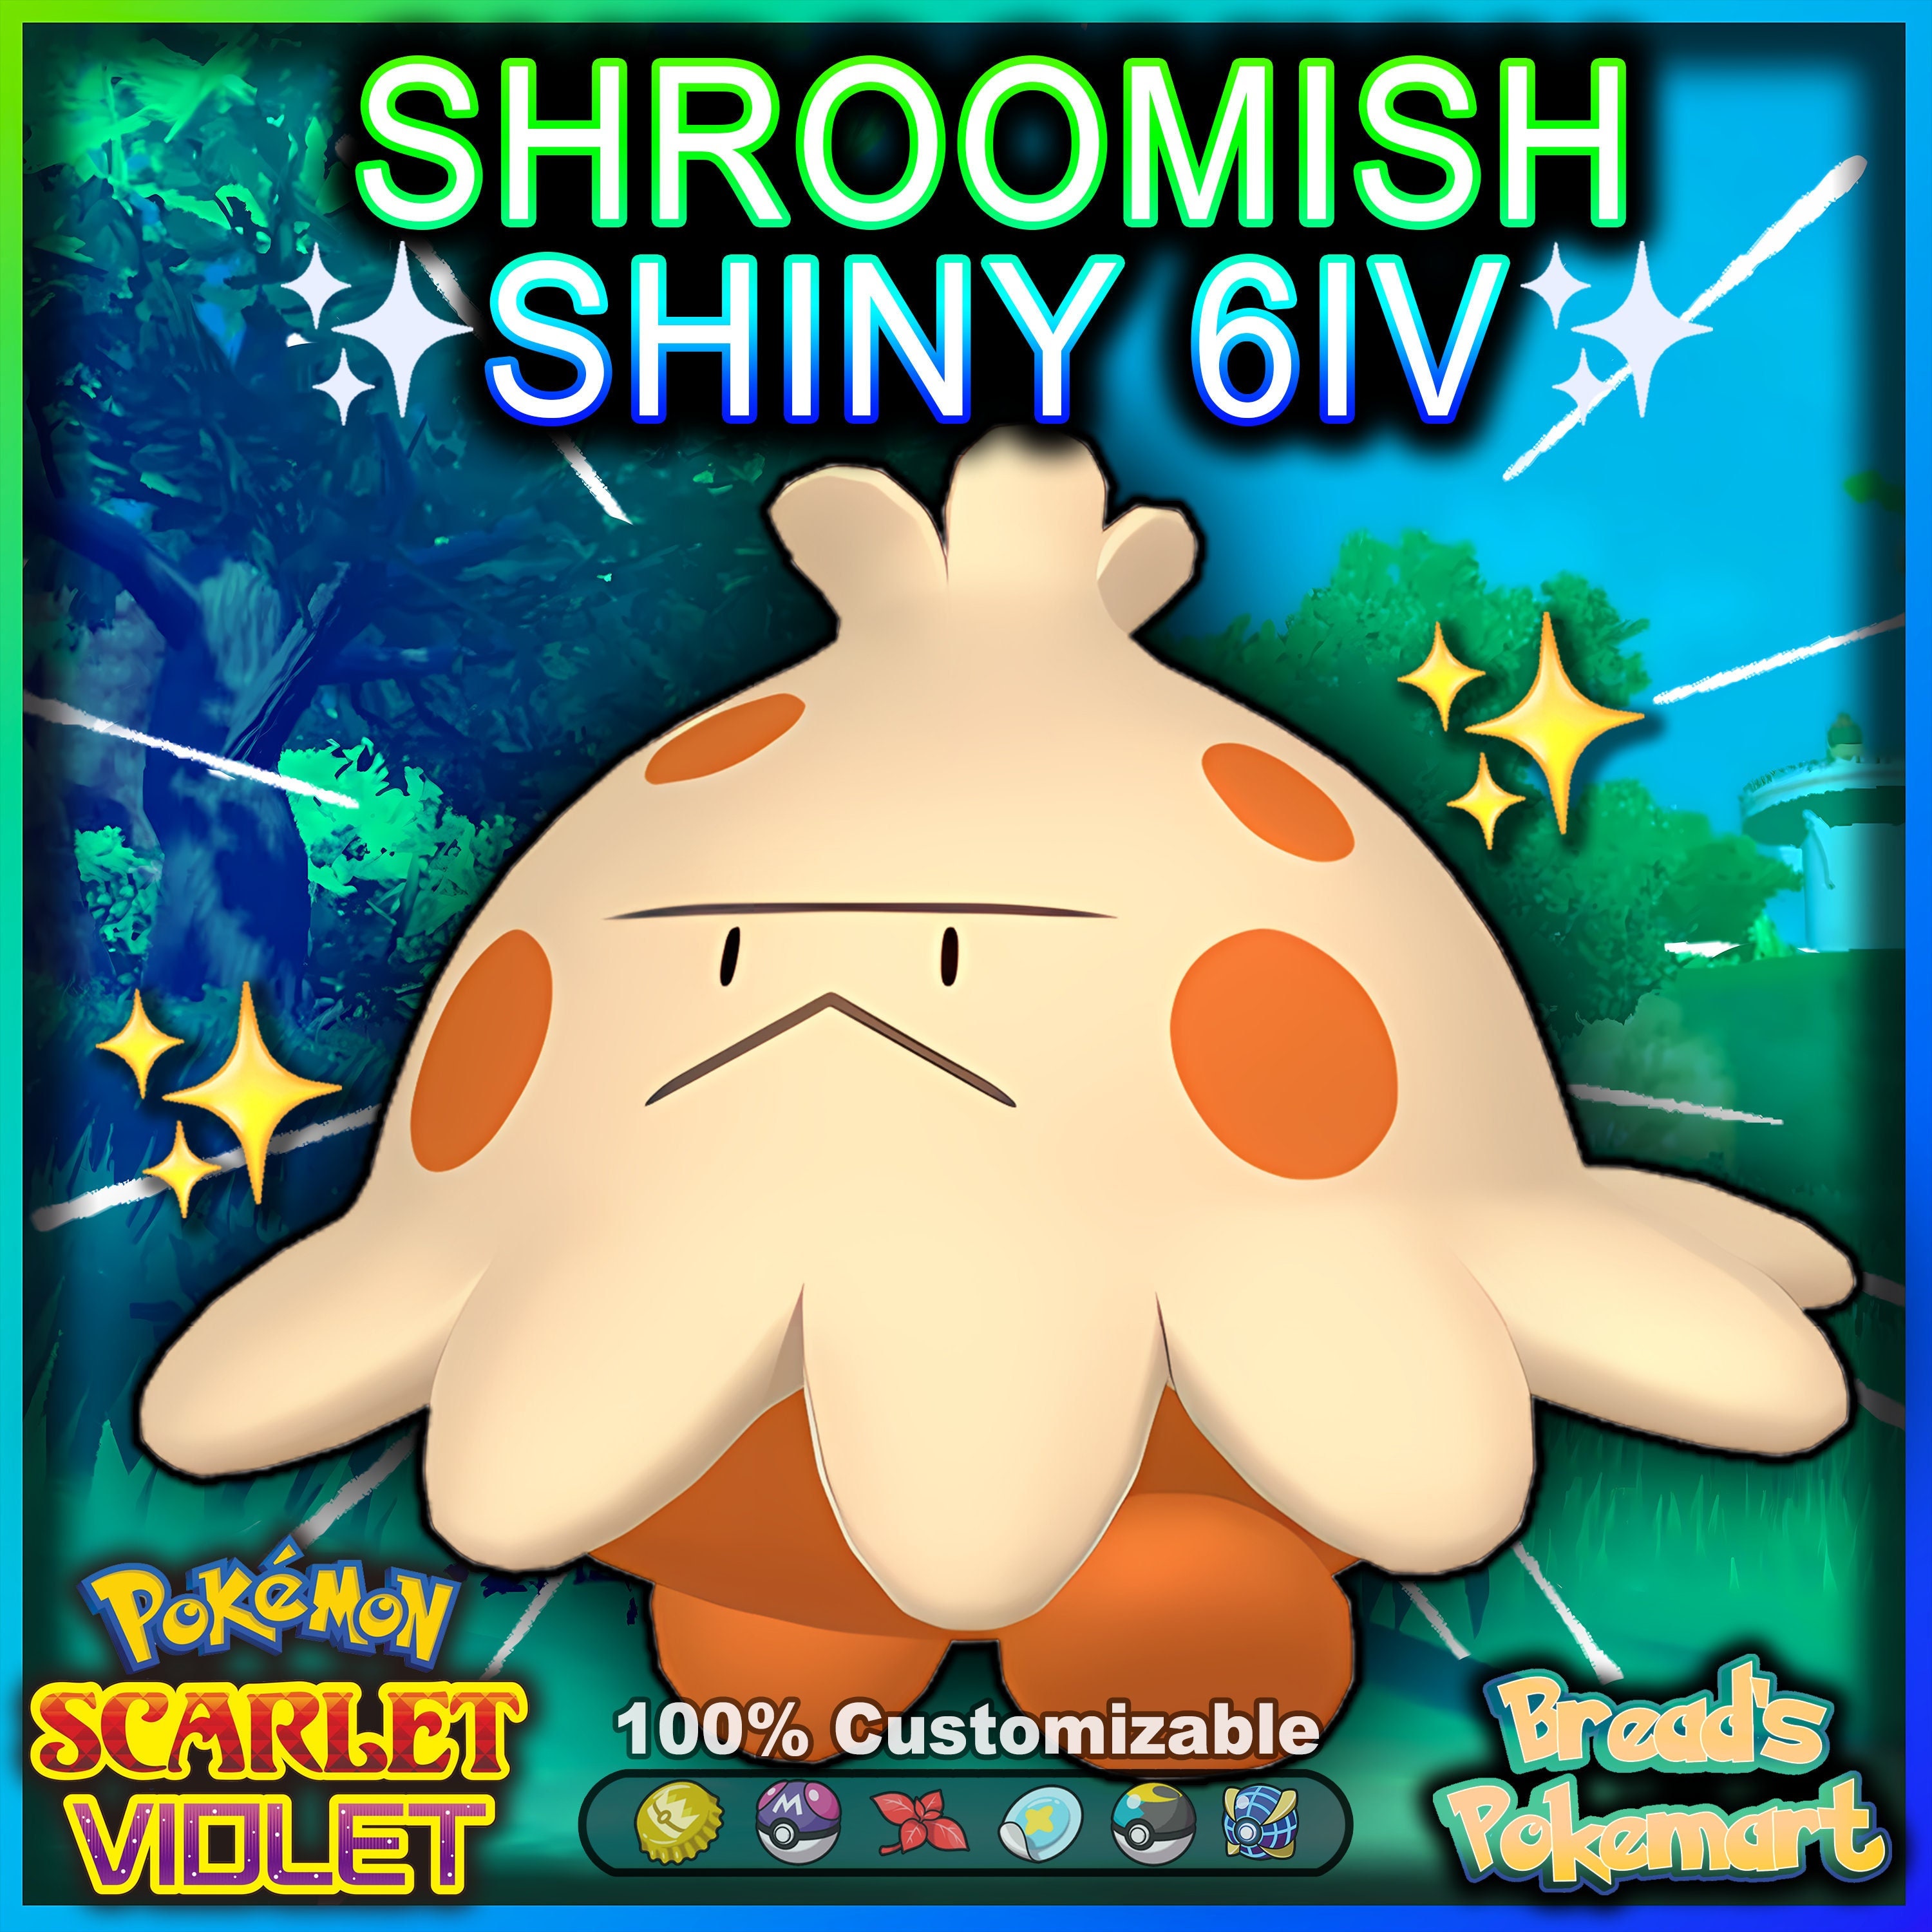 Pokemon Sword And Shield Shiny Toxel (Amped) 6IV Battle Ready Fast Delivery